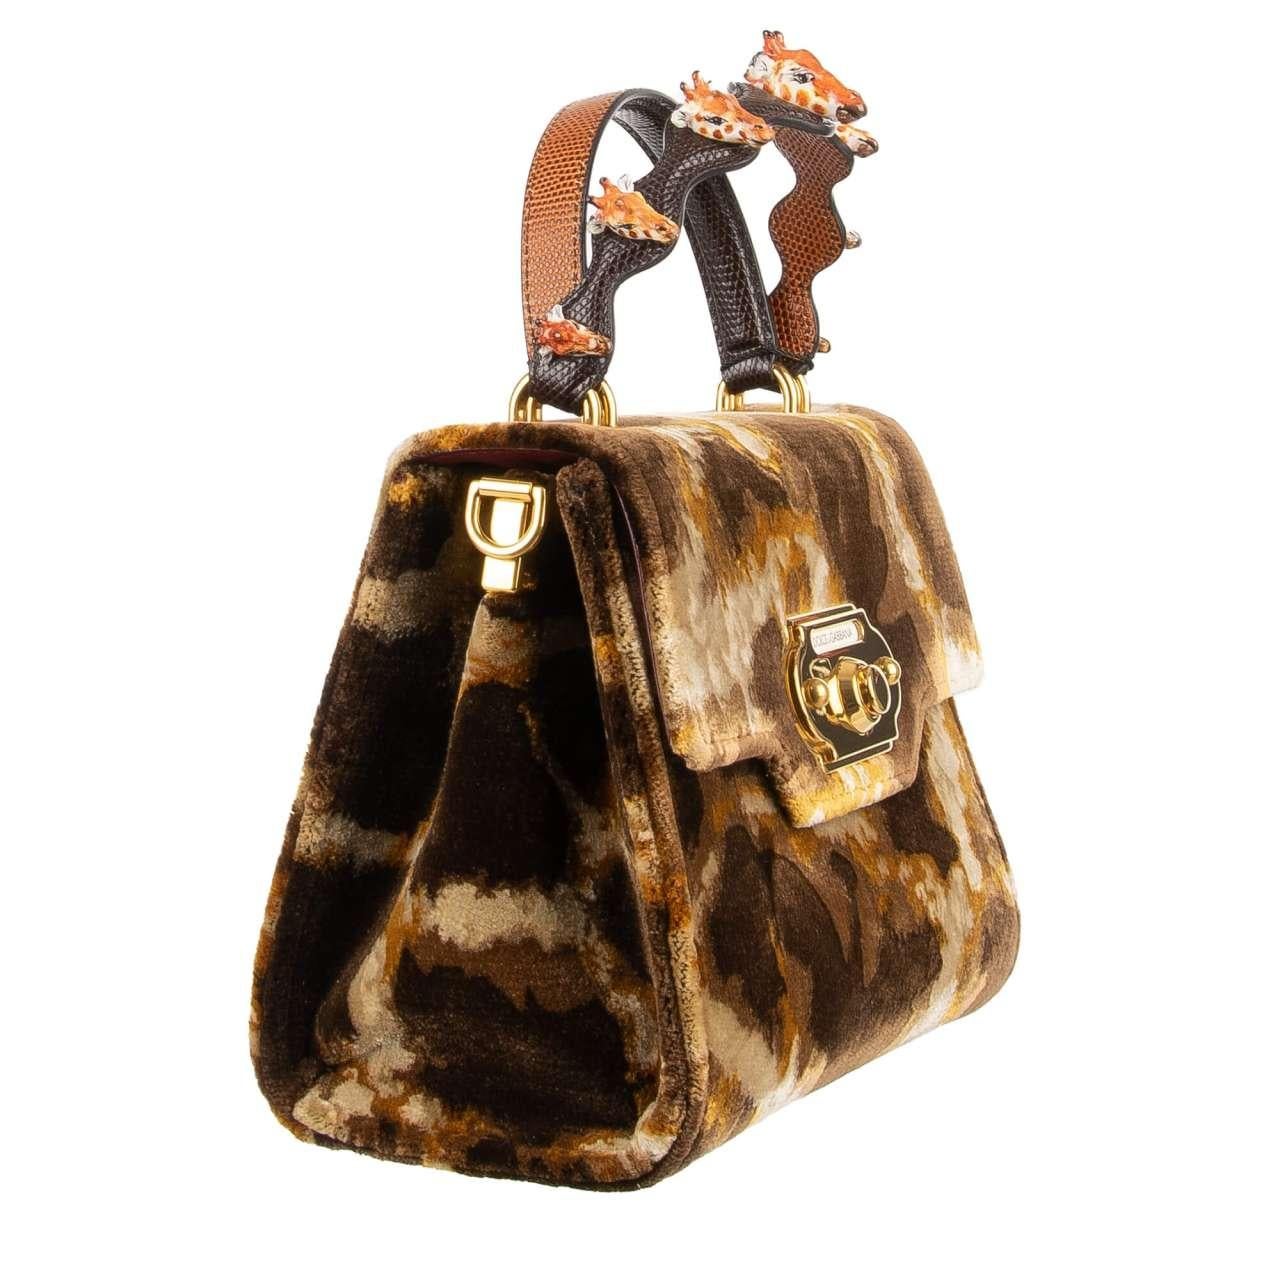 - Giraffe printed Tote / Shoulder Bag WELCOME Medium made of velvet with double handle with giraffe heads embellished handle   by DOLCE & GABBANA - New with Tag, Dustbag and Authenticity Card - Former RRP: EUR 3.850 - MADE IN ITALY - Material: 64%